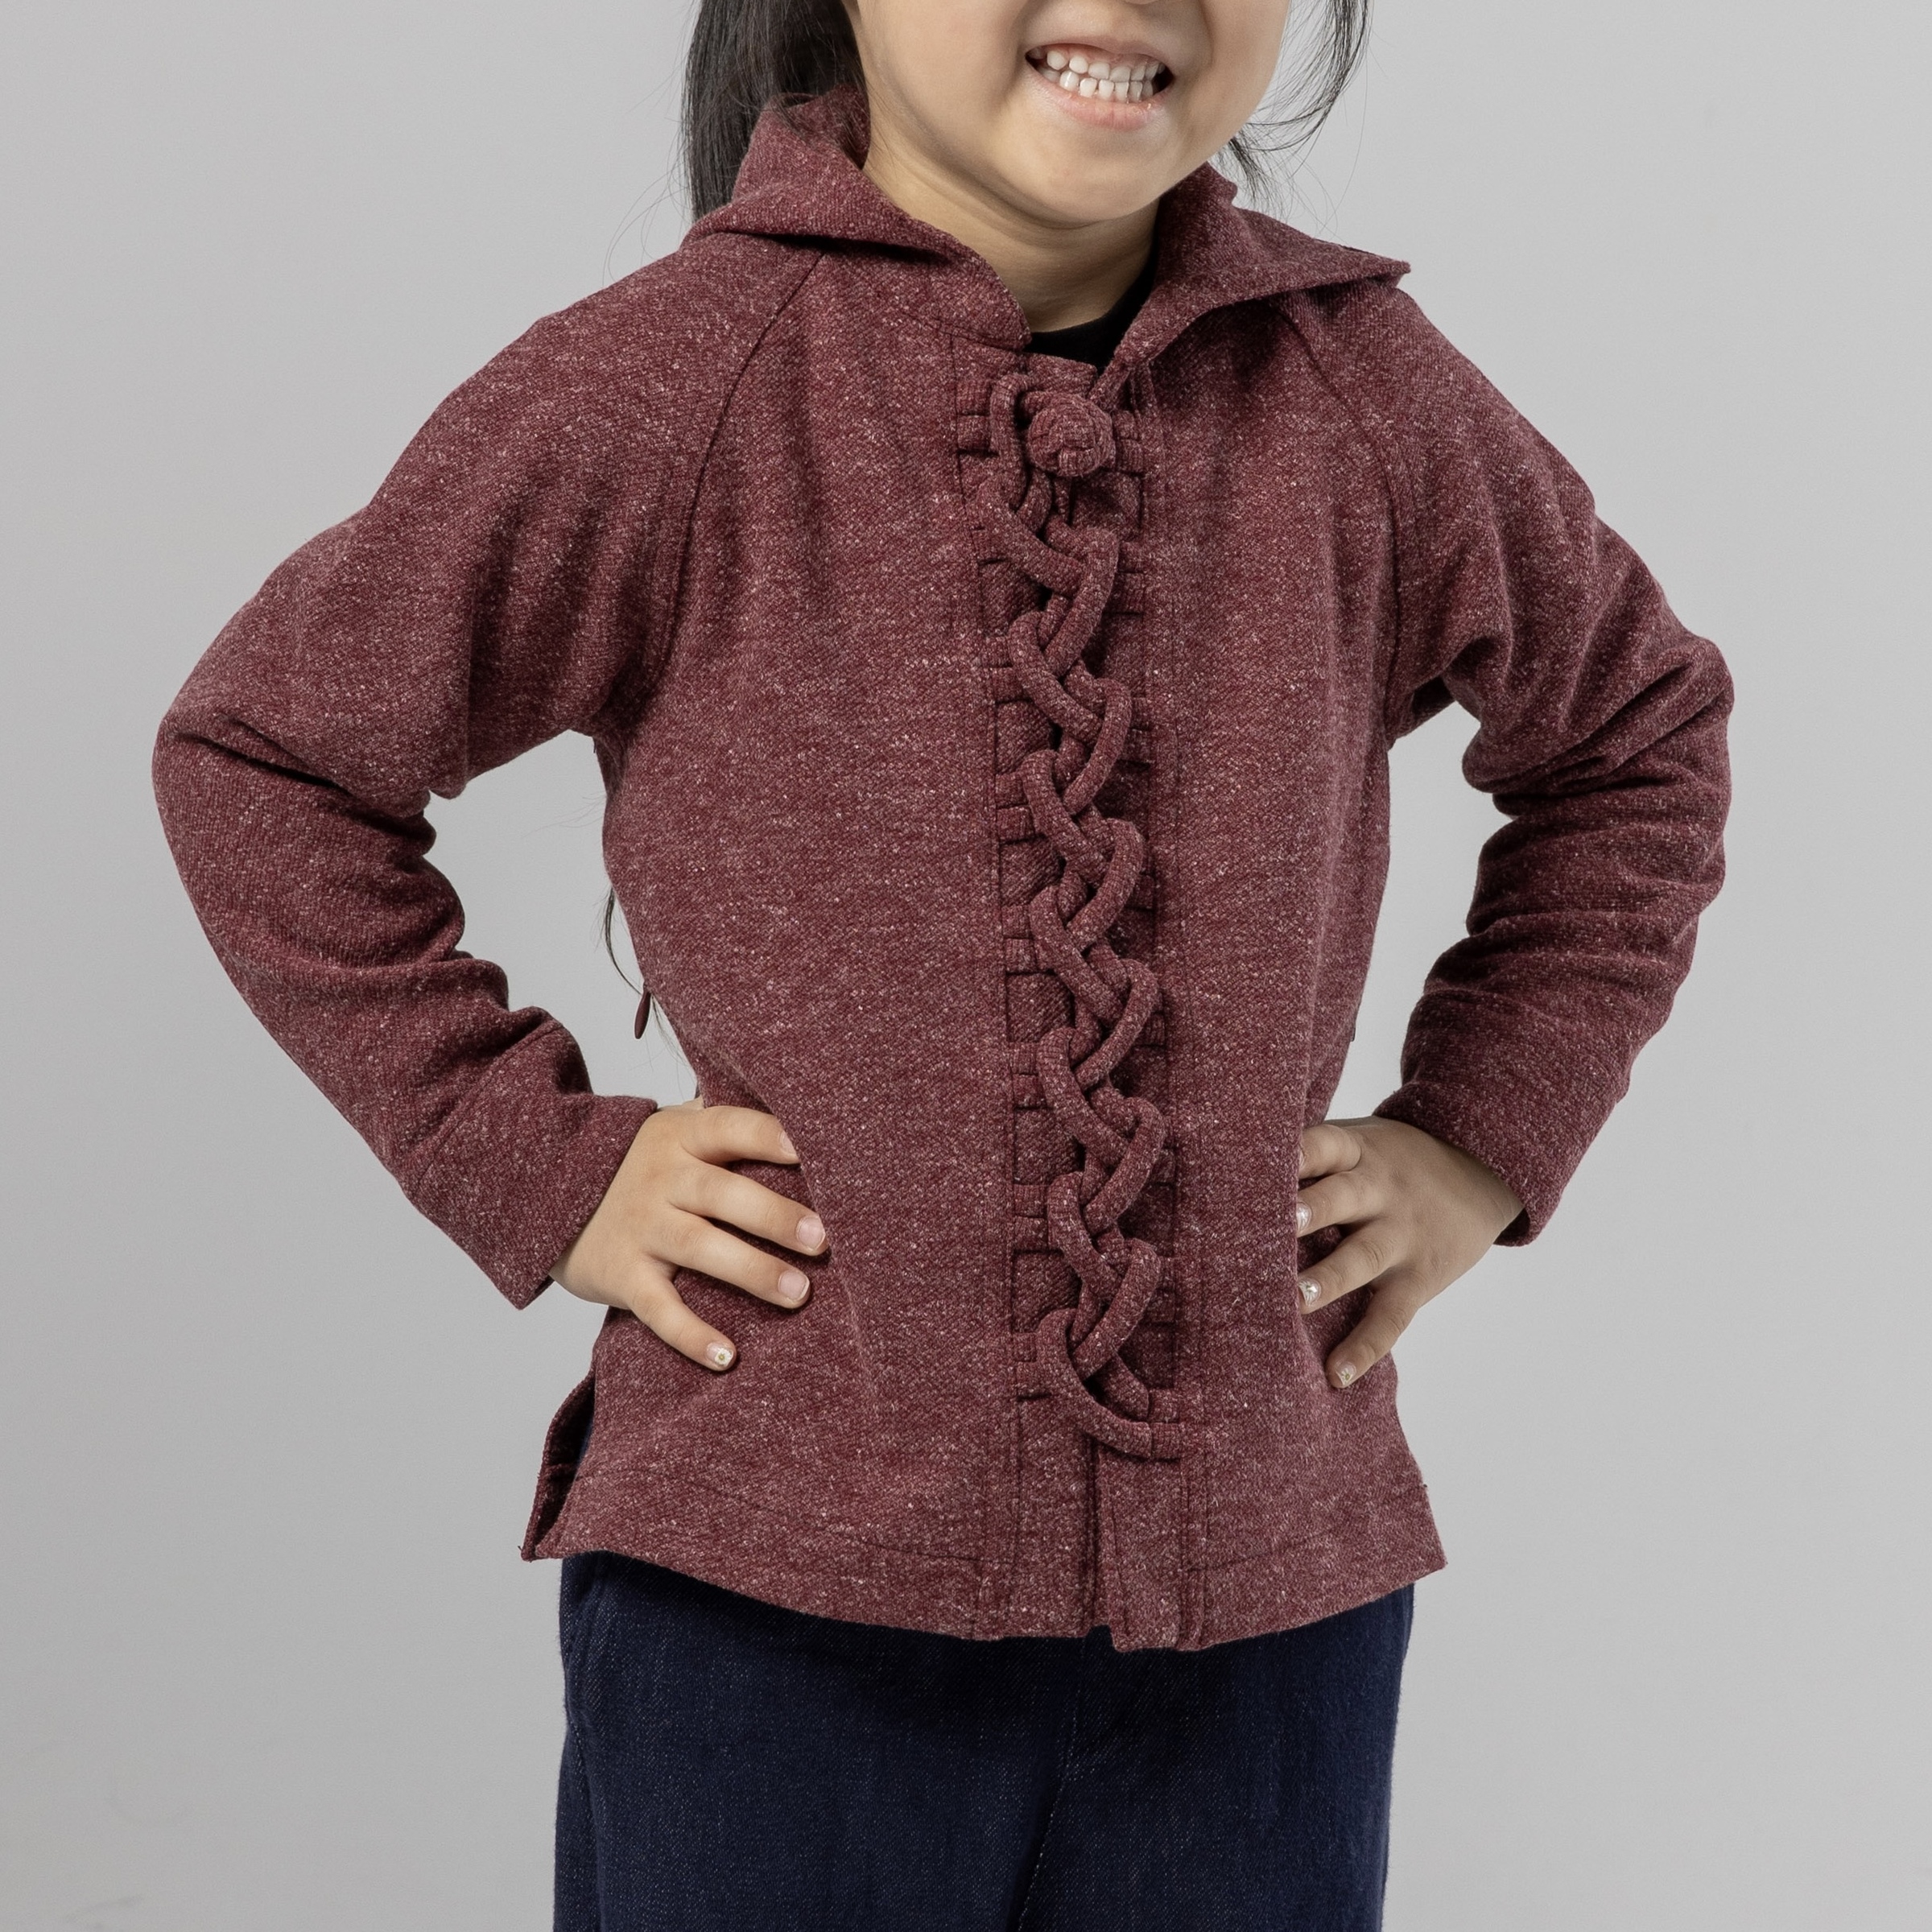 for the cutest kids] - Hoodie Thorough Loops (Bourgogne Red） – FBK Design